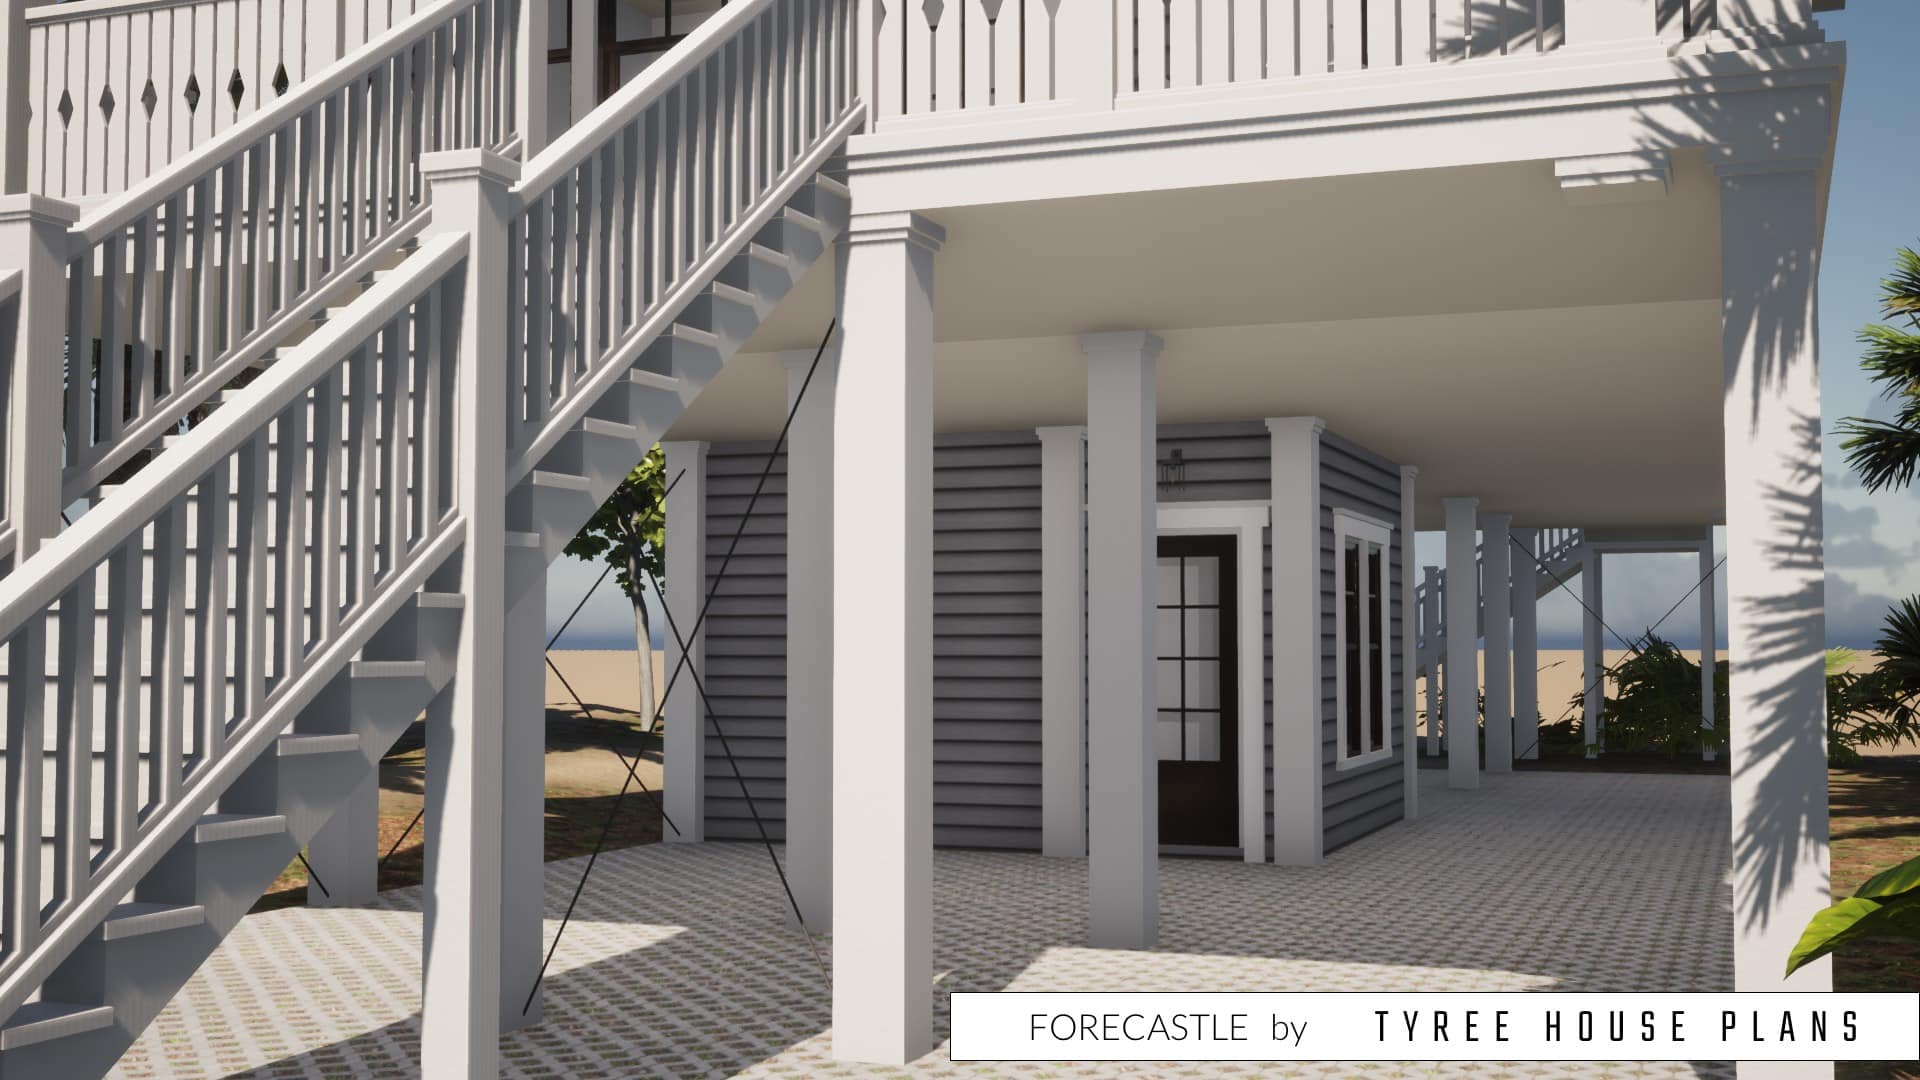 Parking below the house. Forecastle by Tyree House Plans.